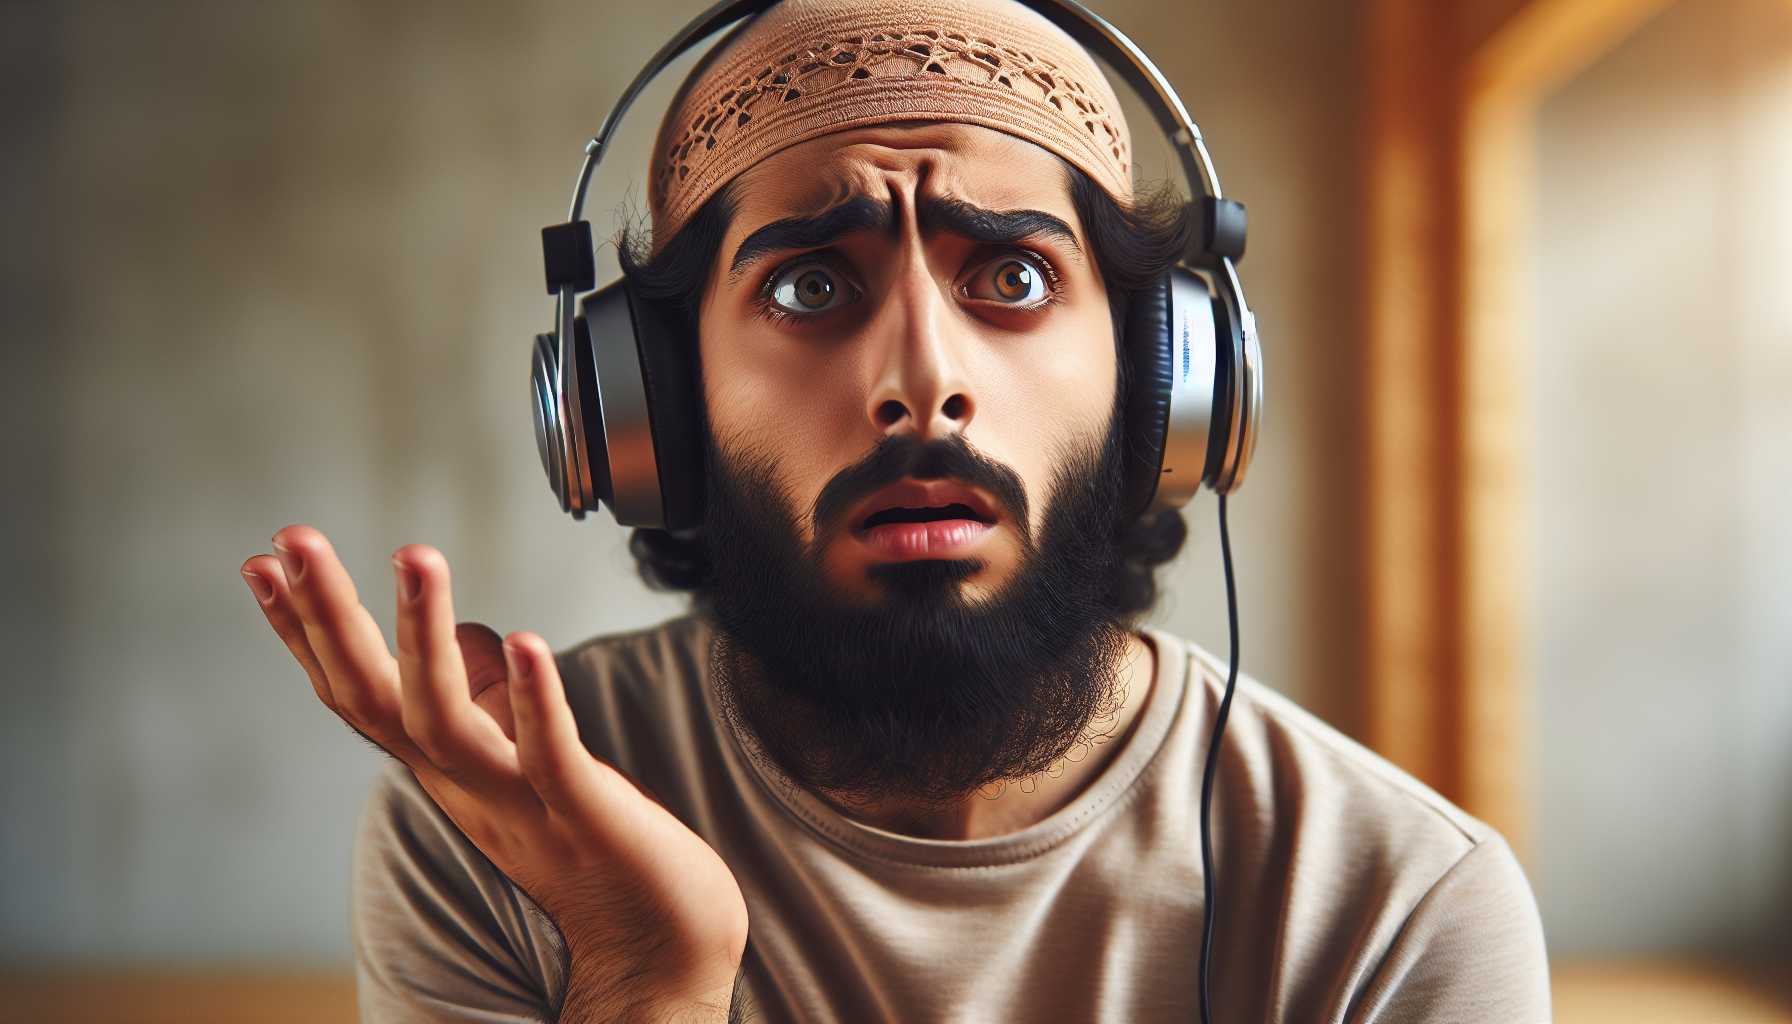 A perplexed person listening to a cloned AI voice on headphones